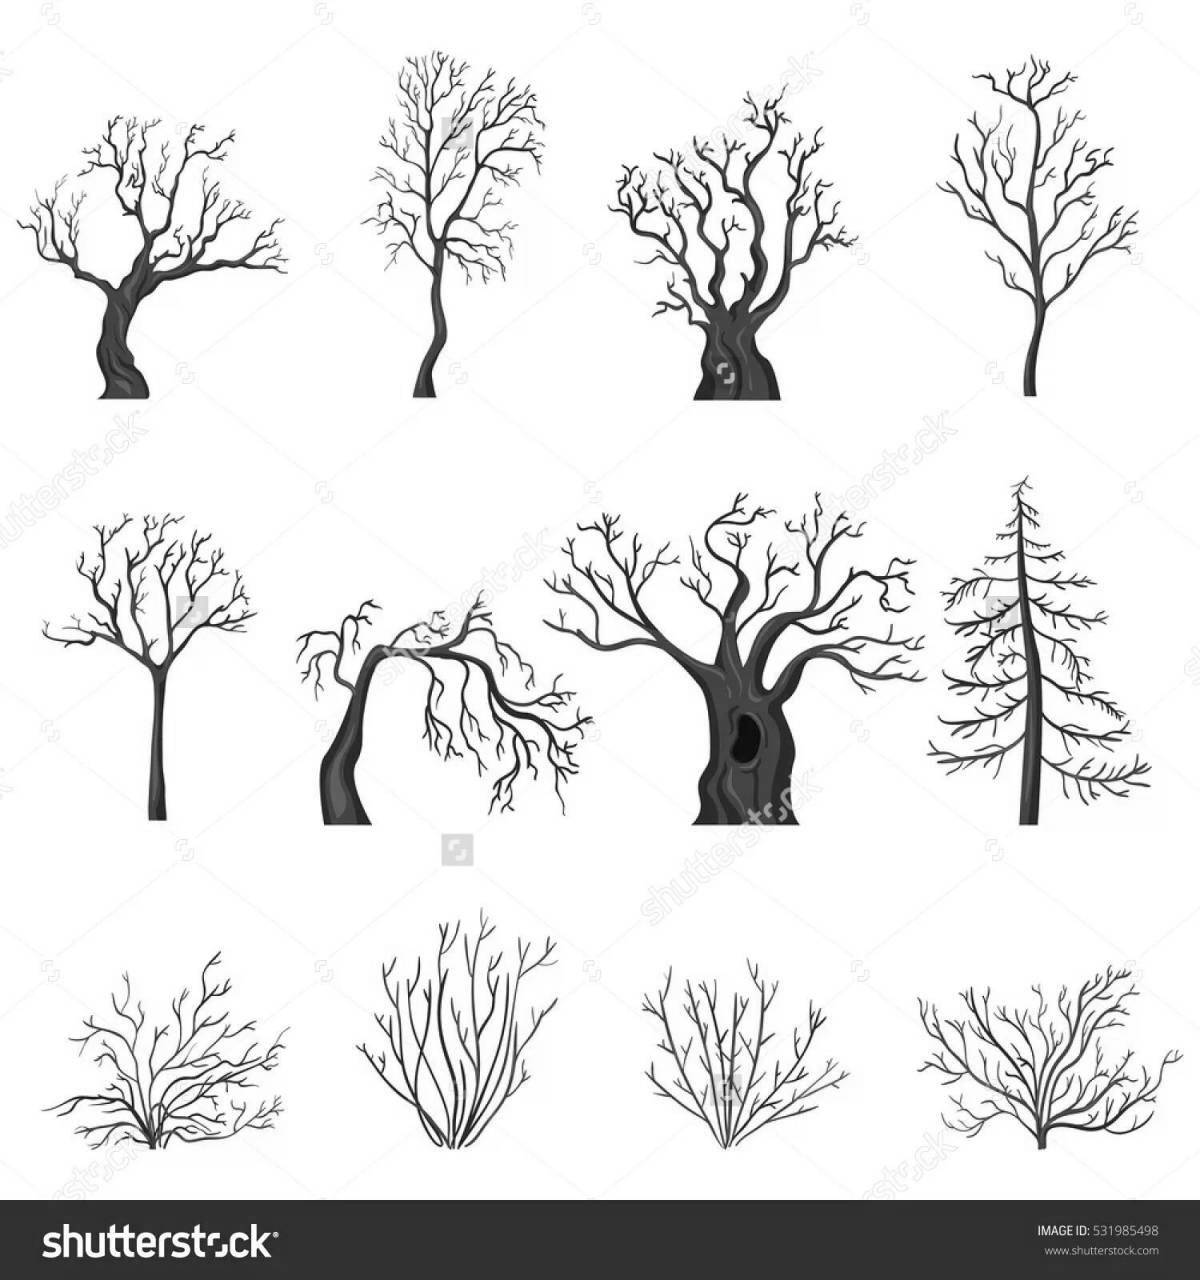 Amazing tree coloring page